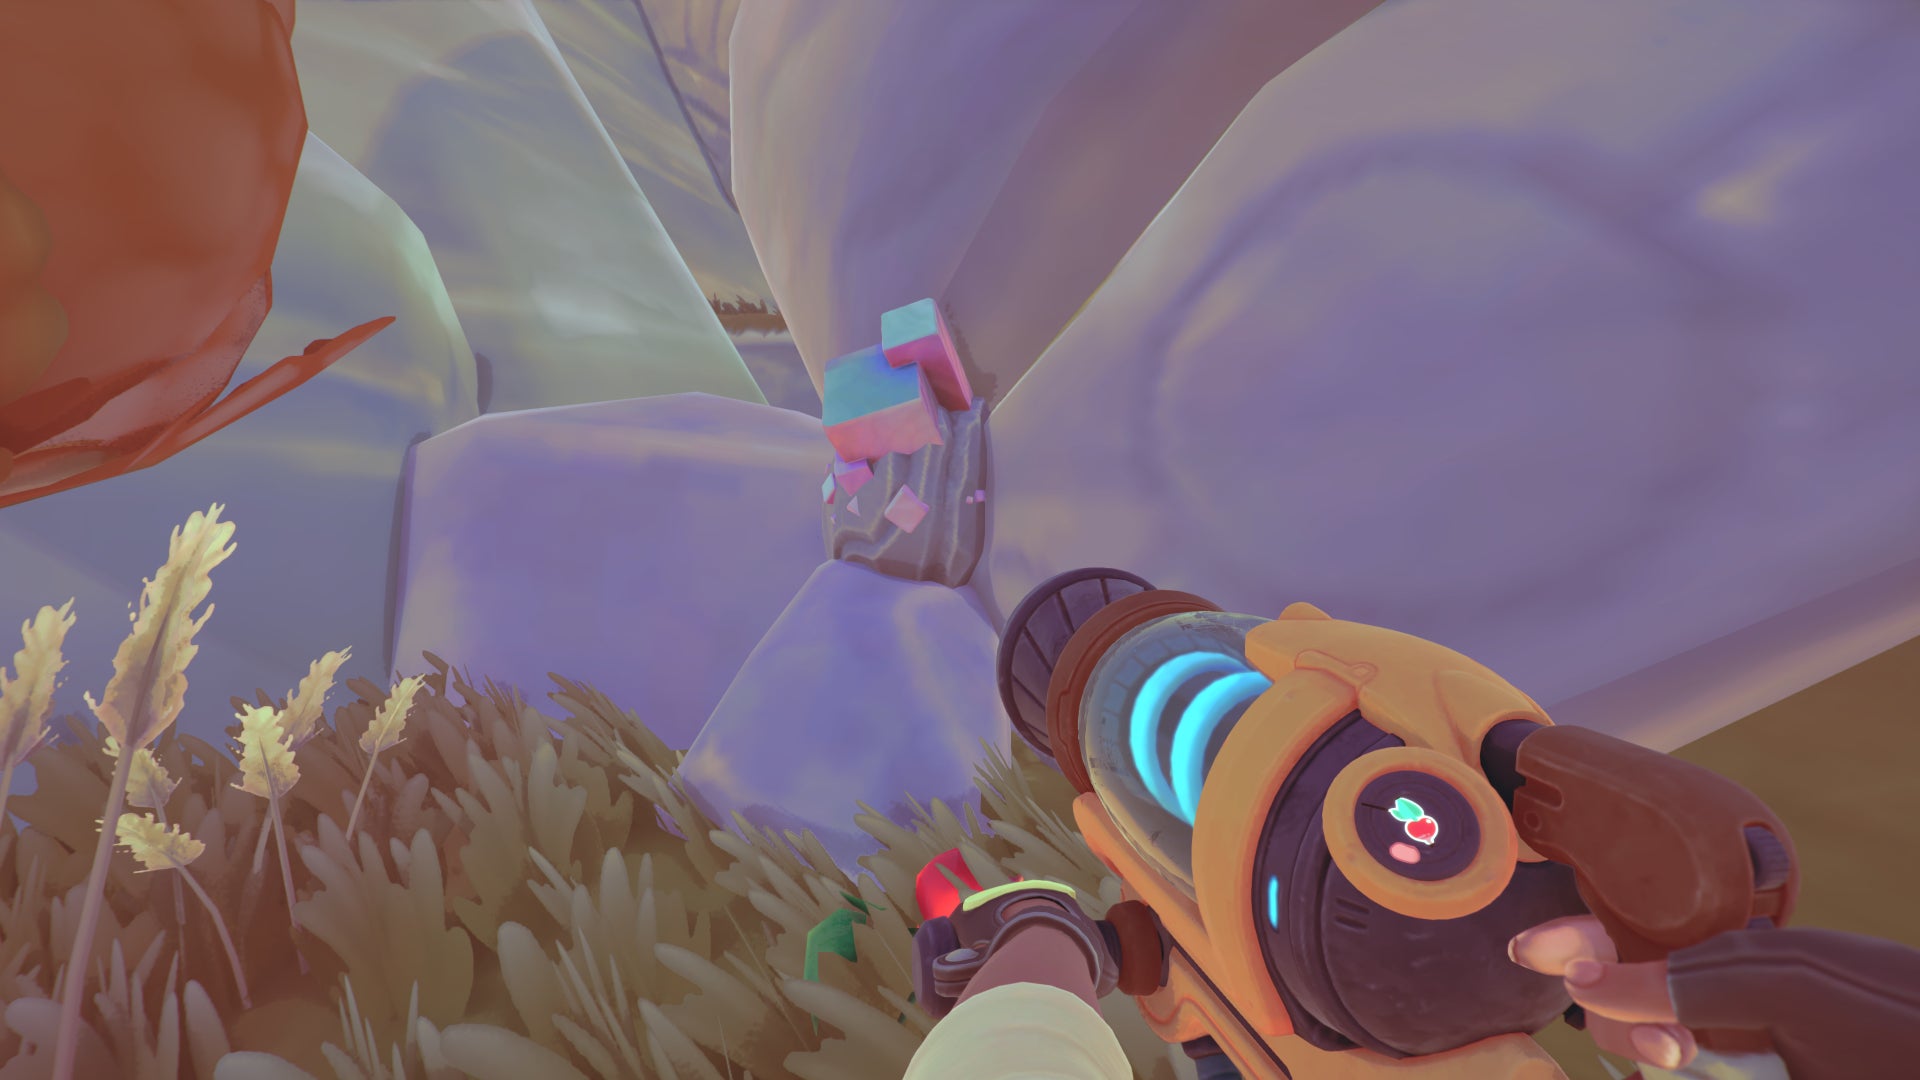 A player points their vacpac at some Radiant Ore in Slime Rancher 2